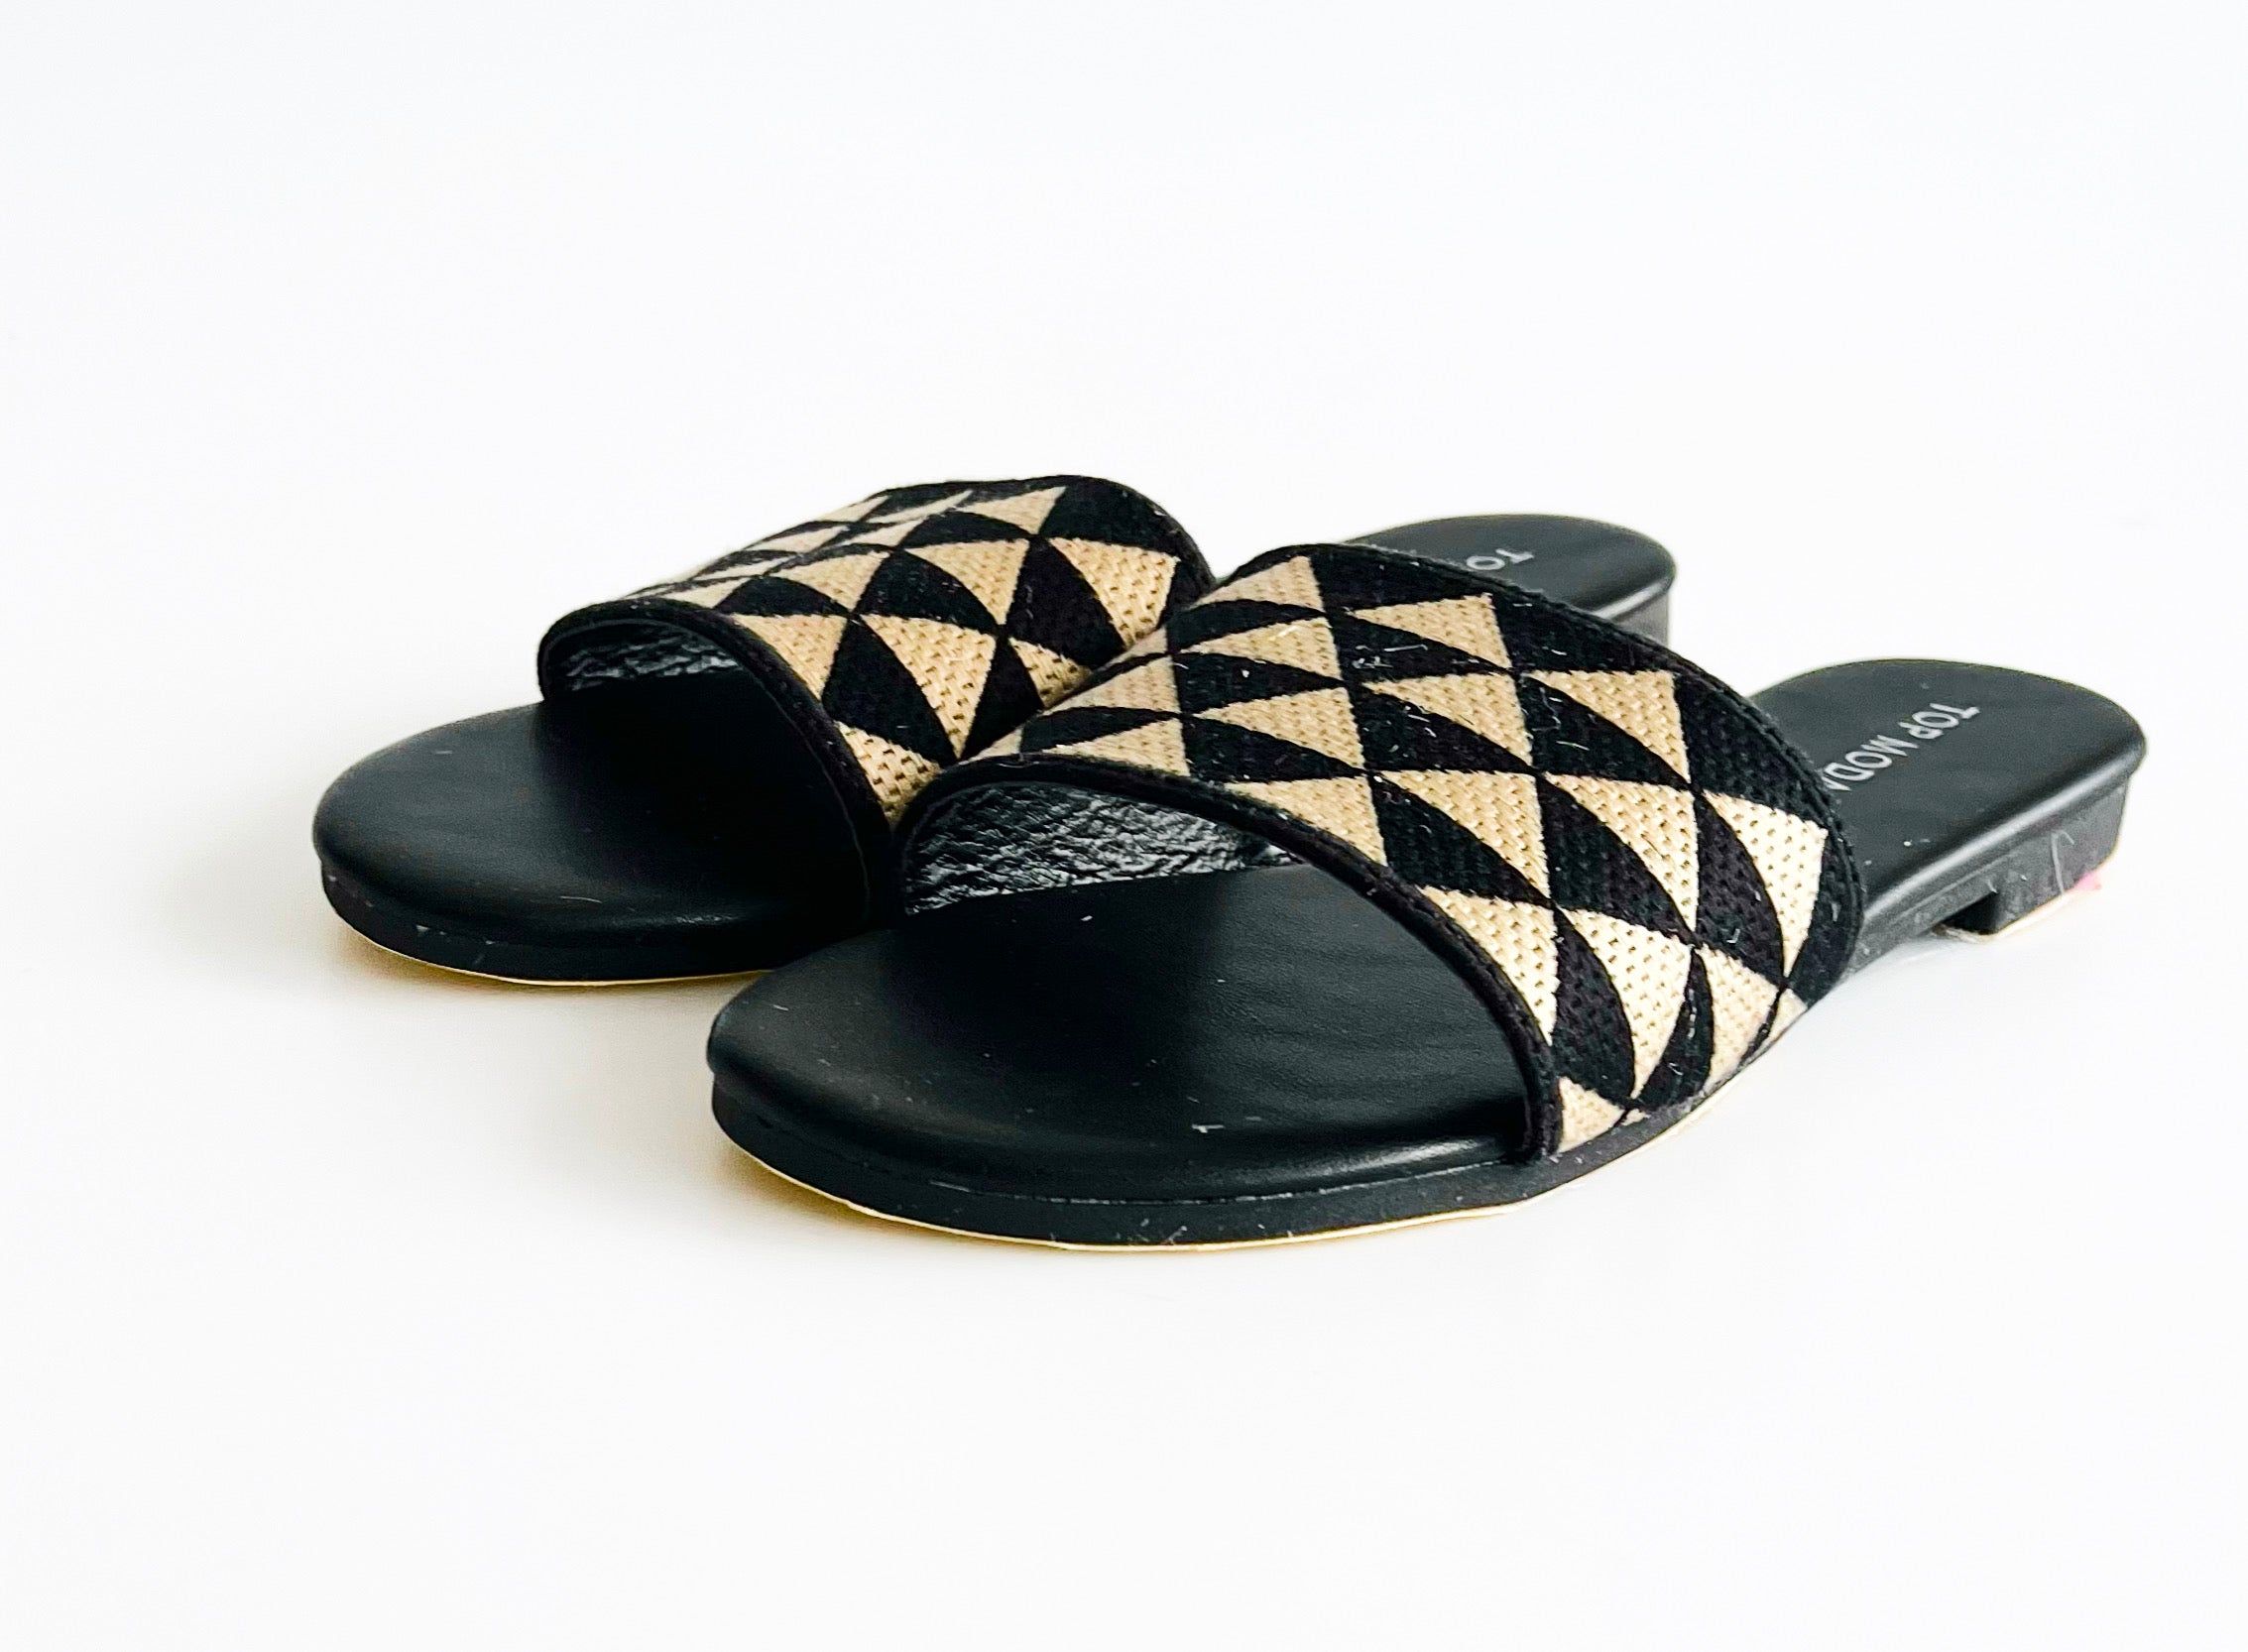 Triangle Print Slip On - Black-250 Shoes-CJ Shoes-Coastal Bloom Boutique, find the trendiest versions of the popular styles and looks Located in Indialantic, FL